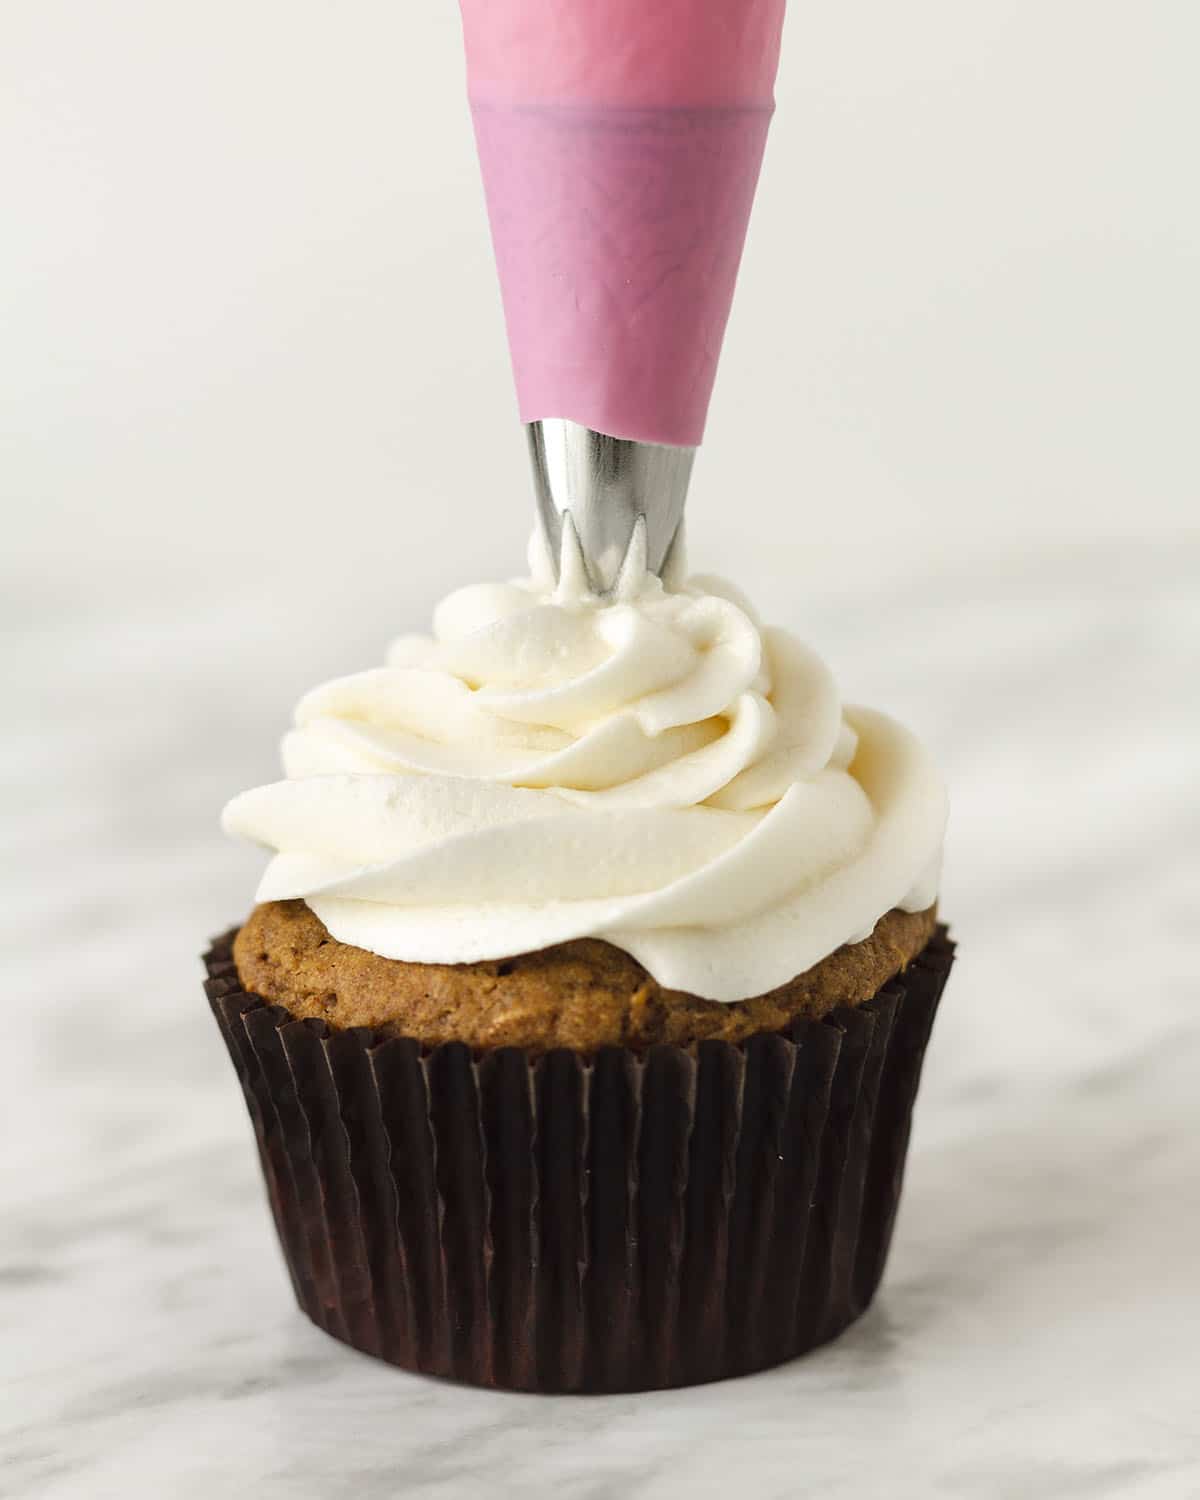 Dairy-free cream cheese icing being piped onto a carrot cupcake.